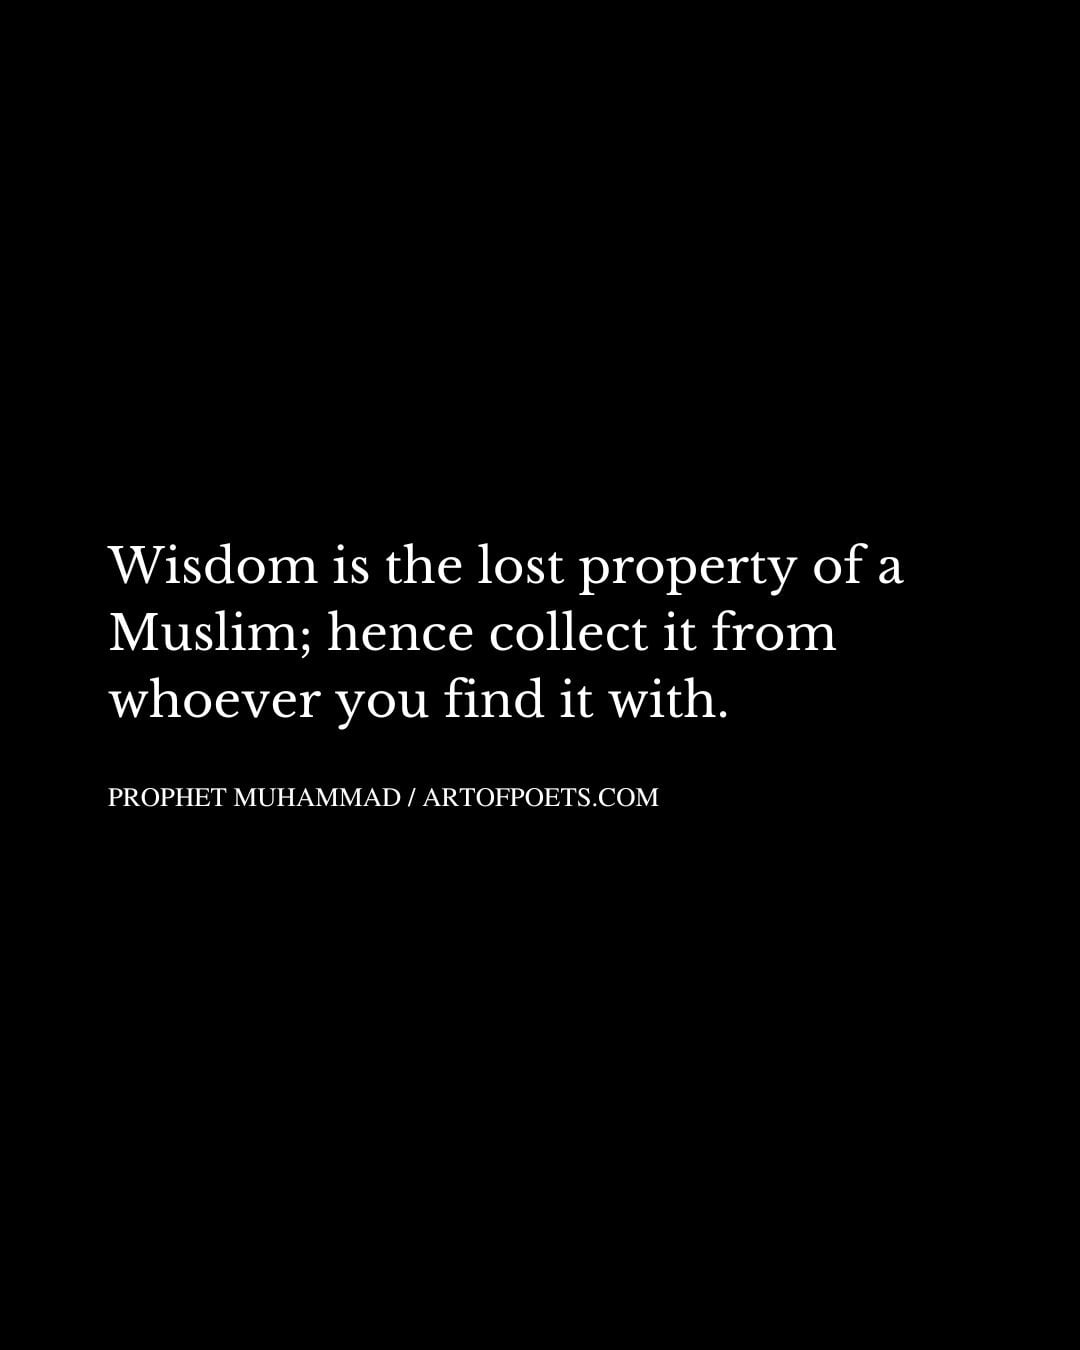 Wisdom is the lost property of a Muslim hence collect it from whoever you find it with